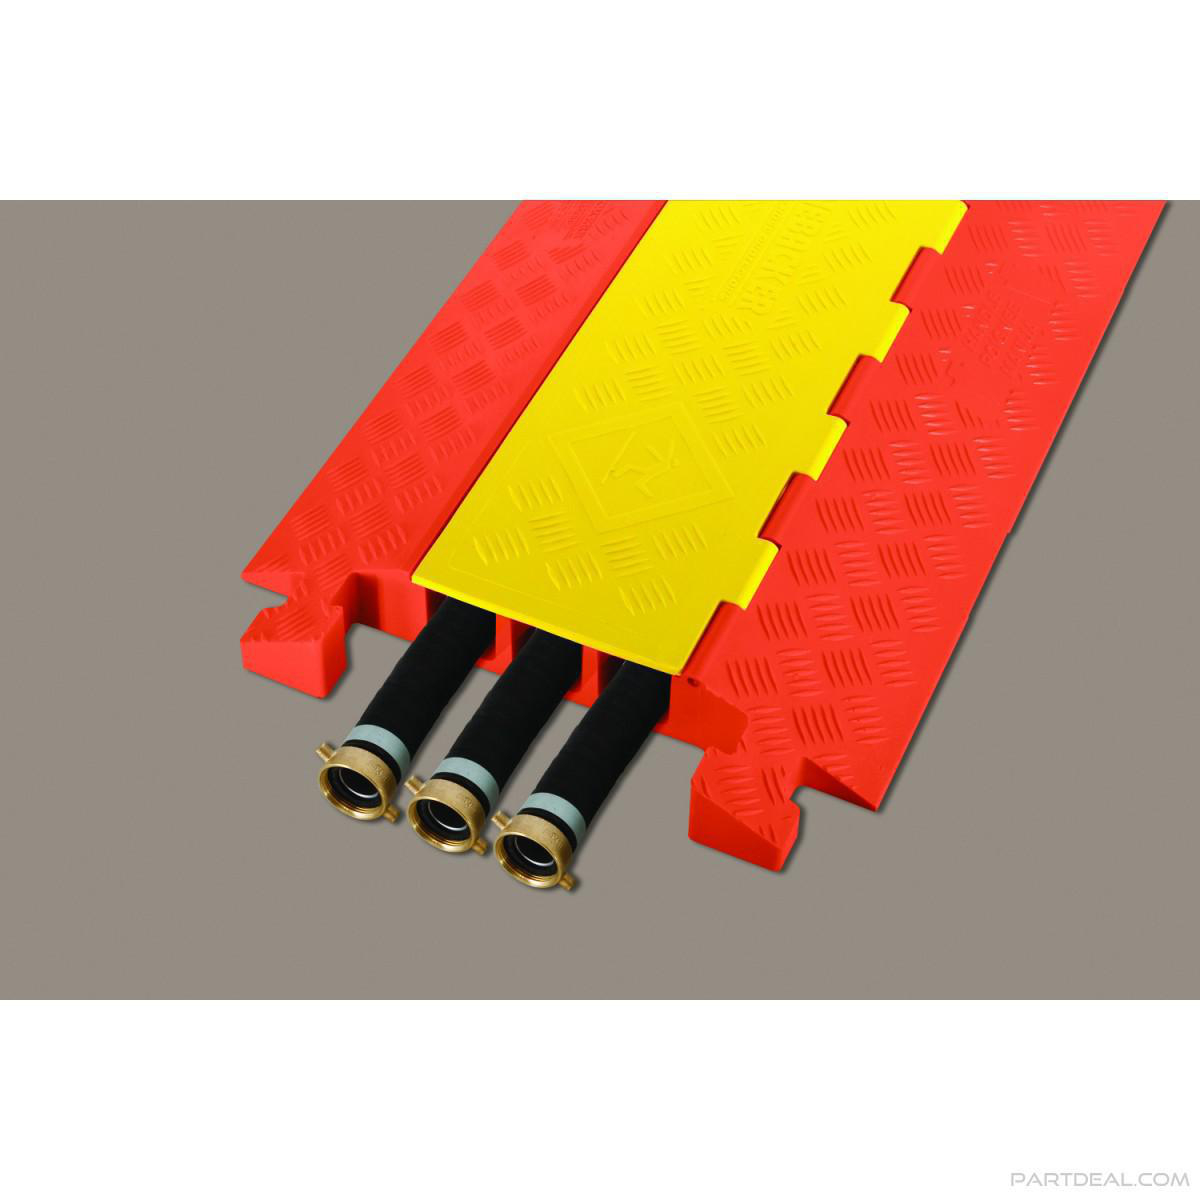 CHECKERS CP3X225-Y/O Linebacker® Cable Protector 3 Channels 36 in L x 20 in  W x 3.05 in H UV Stabilized Polyurethane Orange/Yellow